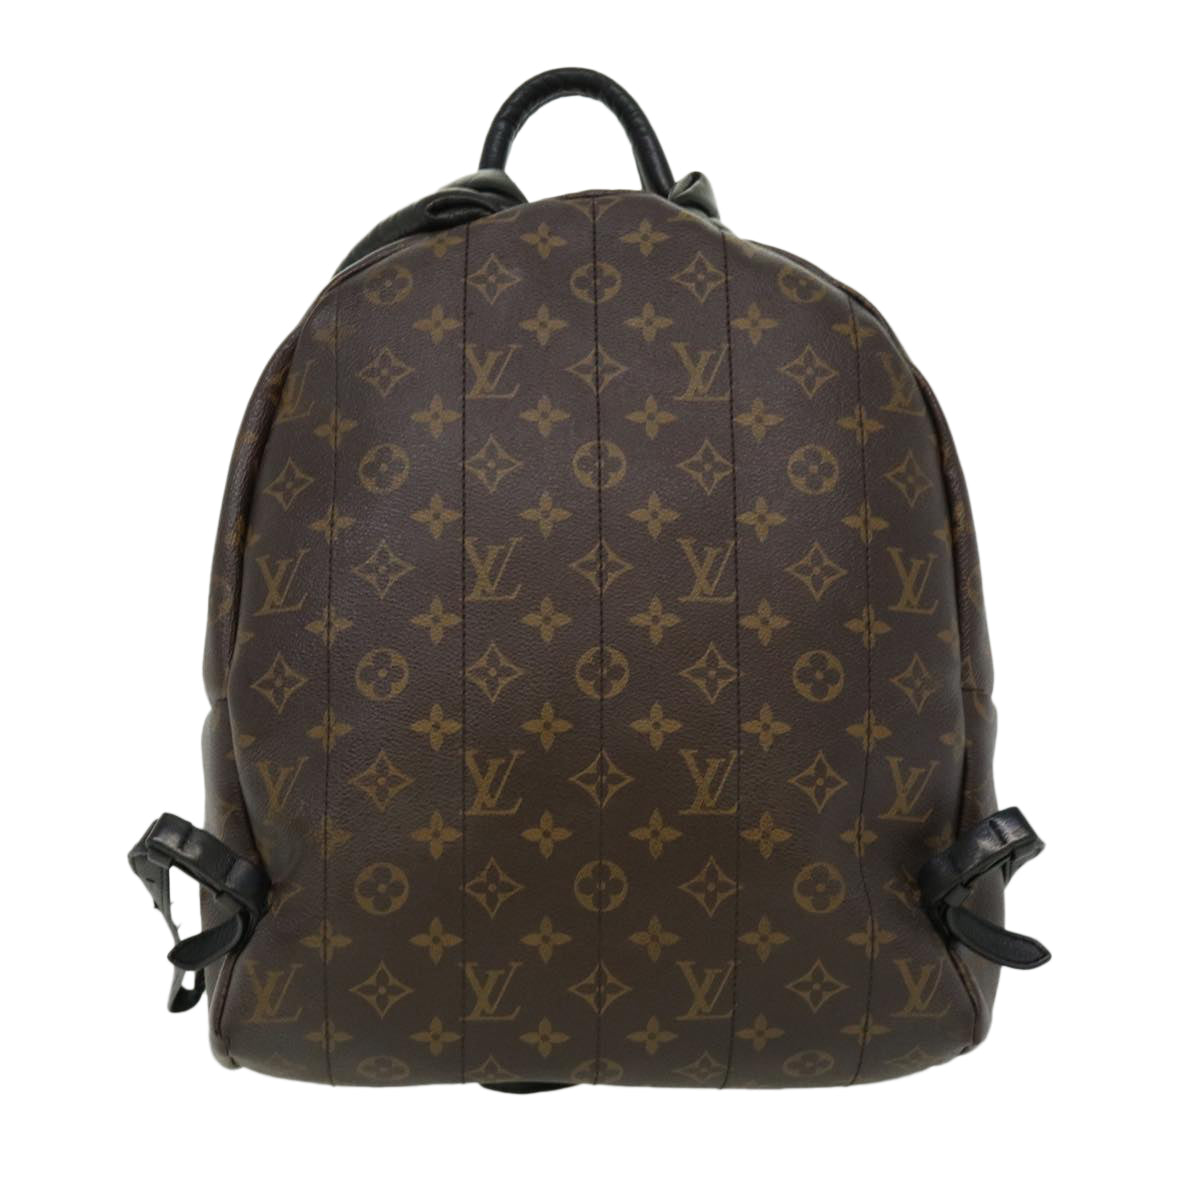 LOUIS VUITTON Monogram Palm Springs PM Backpack M41560 LV Auth 32578 - 0